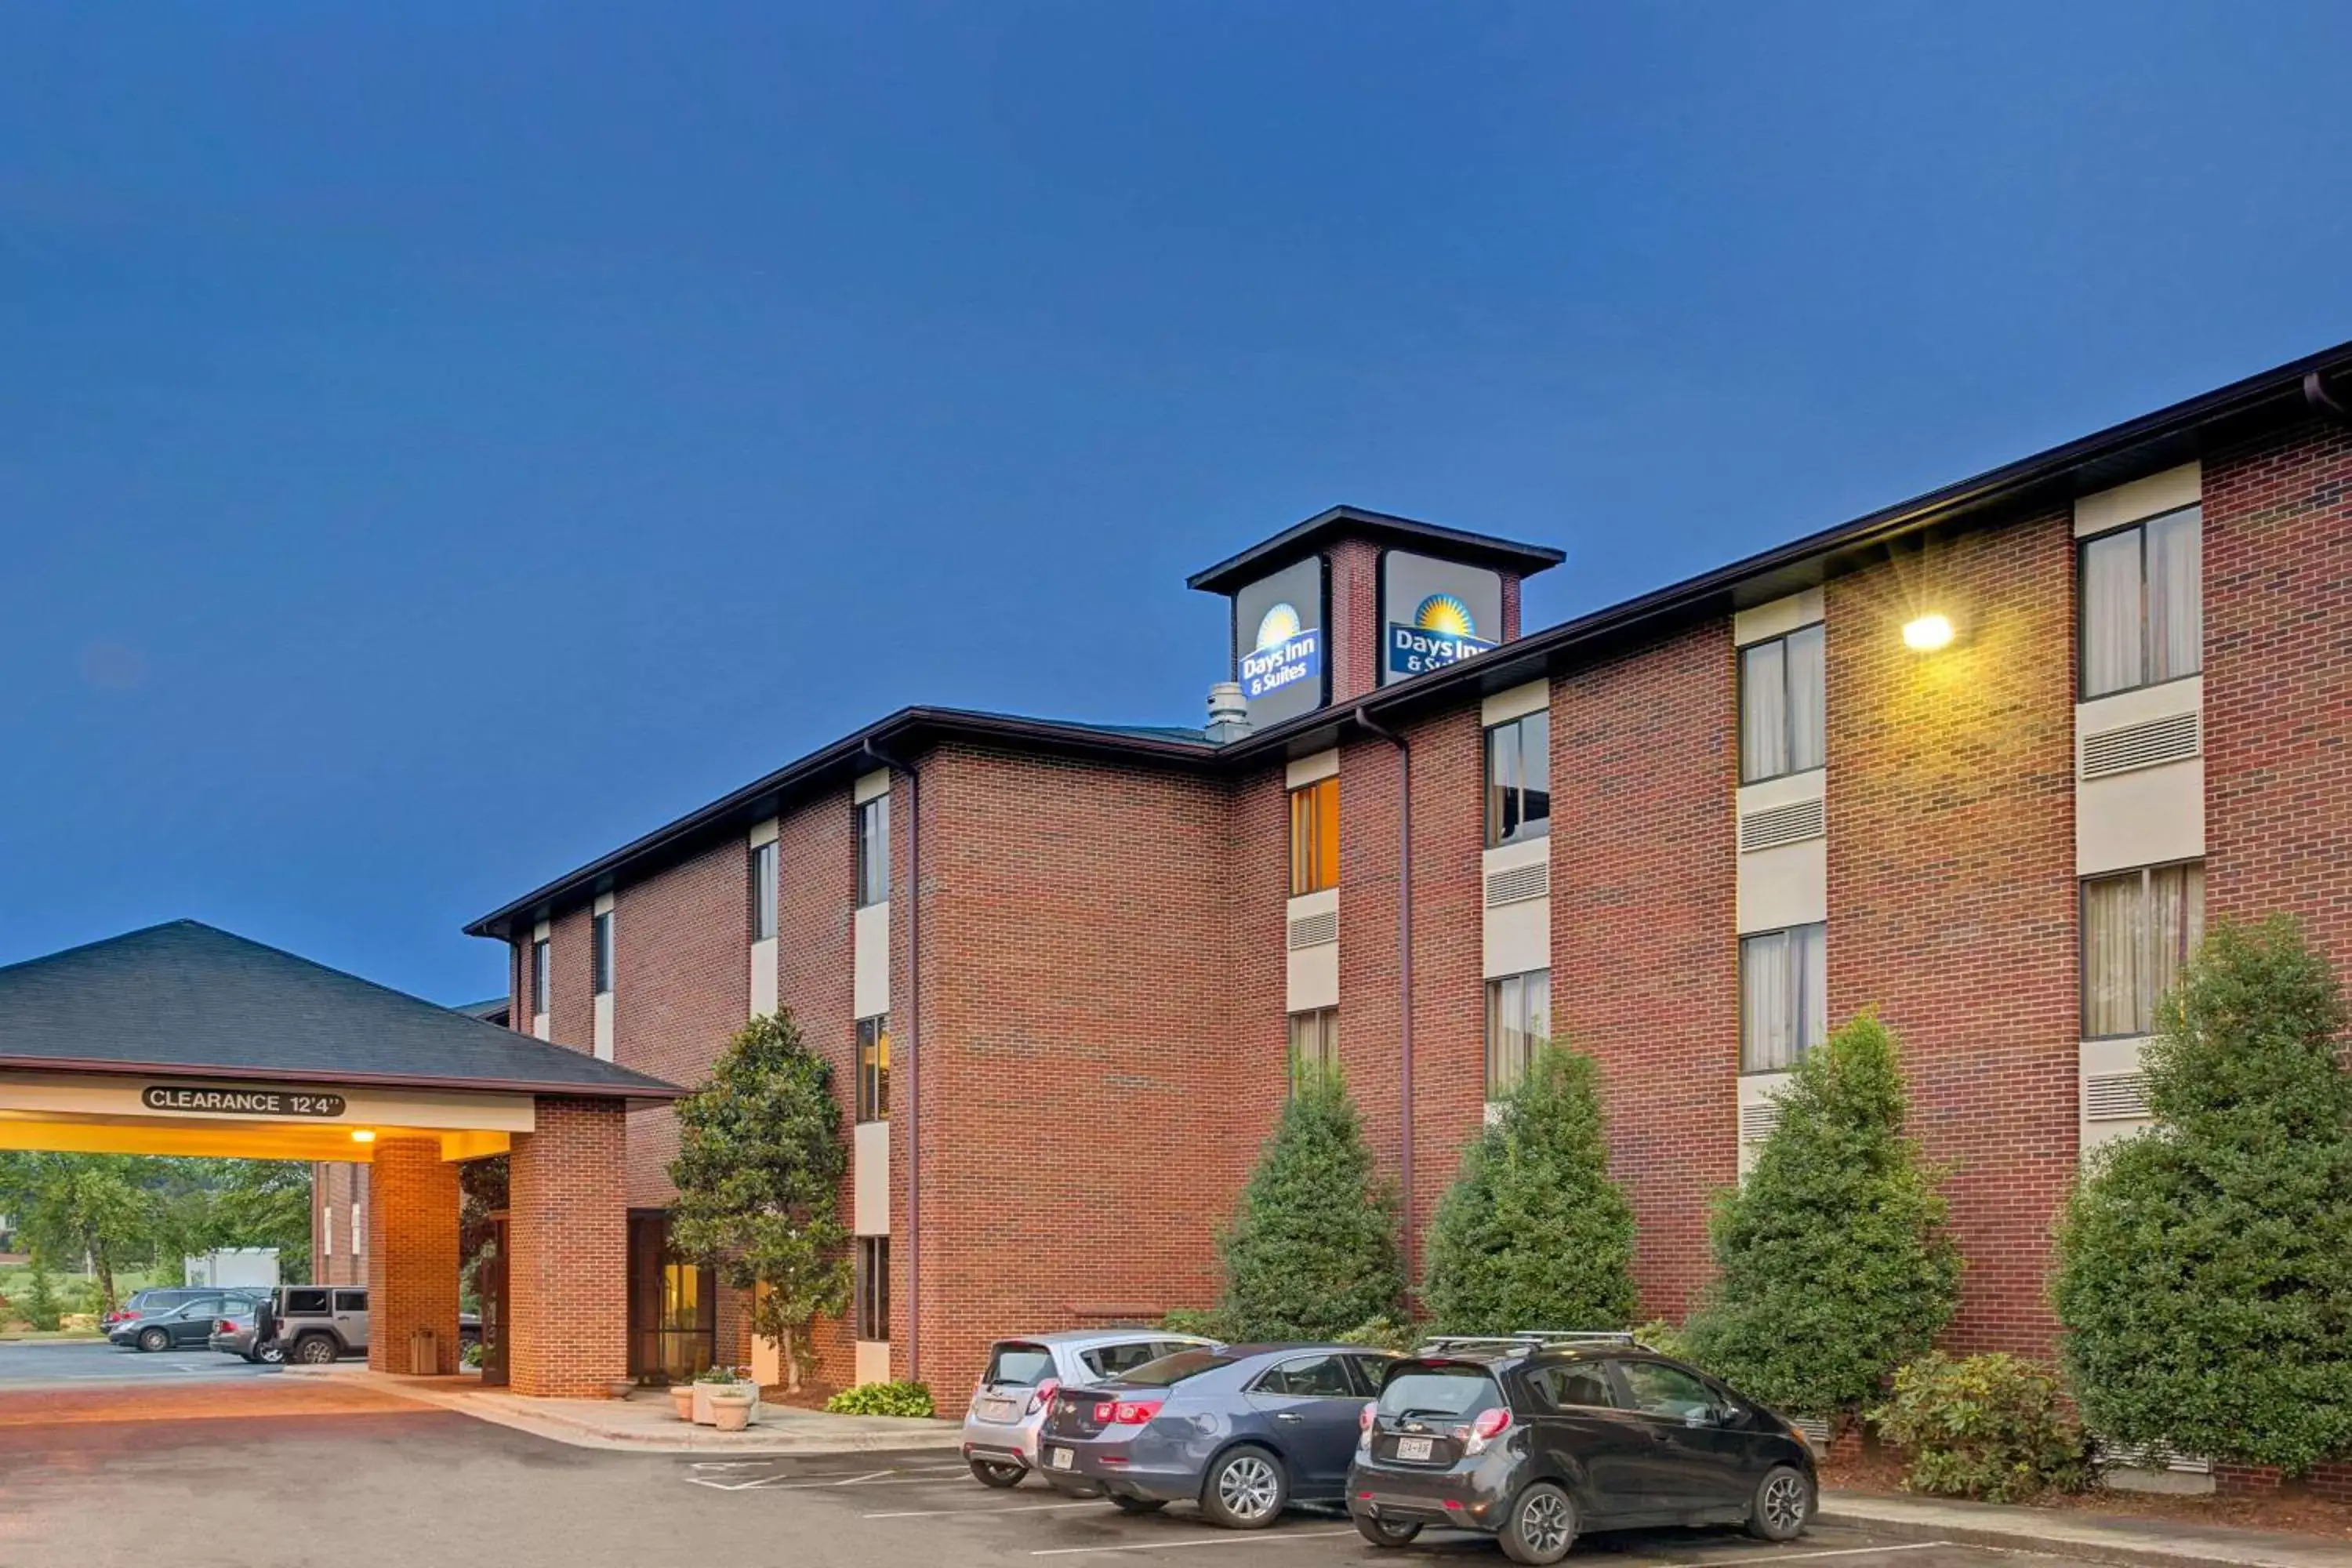 Property Building in Days Inn & Suites by Wyndham Hickory